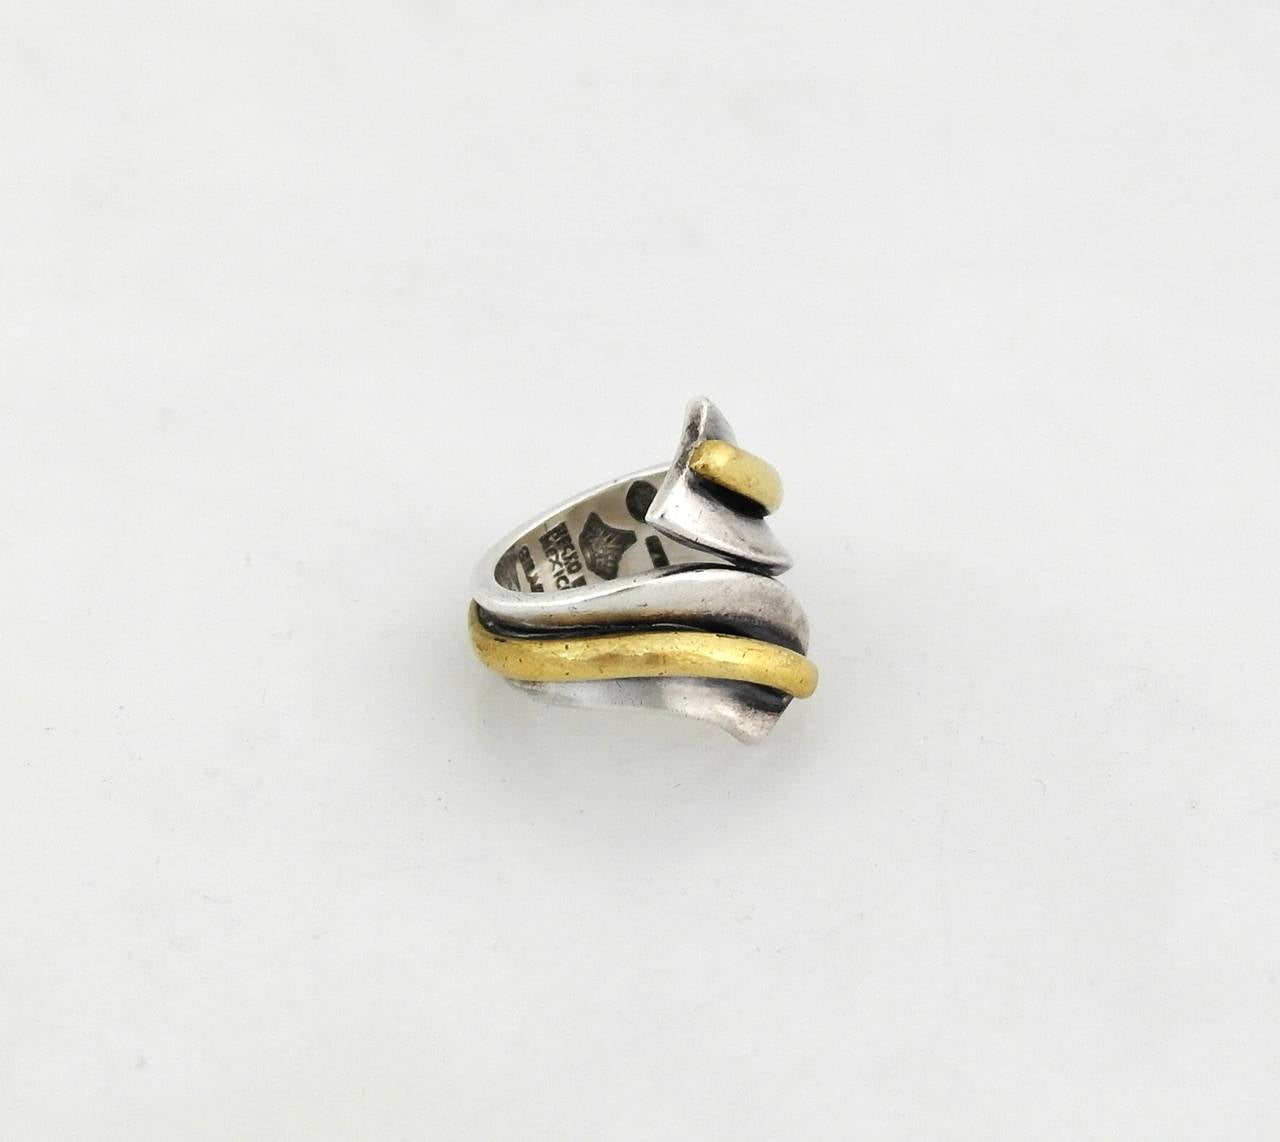 Being offered is a circa 1961 .970 silver ring by Antonio Pineda of Taxco, Mexico. Twist form ring with applied brass at the center. Dimensions:      Marked as illustrated. In excellent condition.

Stanley Szaro Antonio Pineda Collection

In the